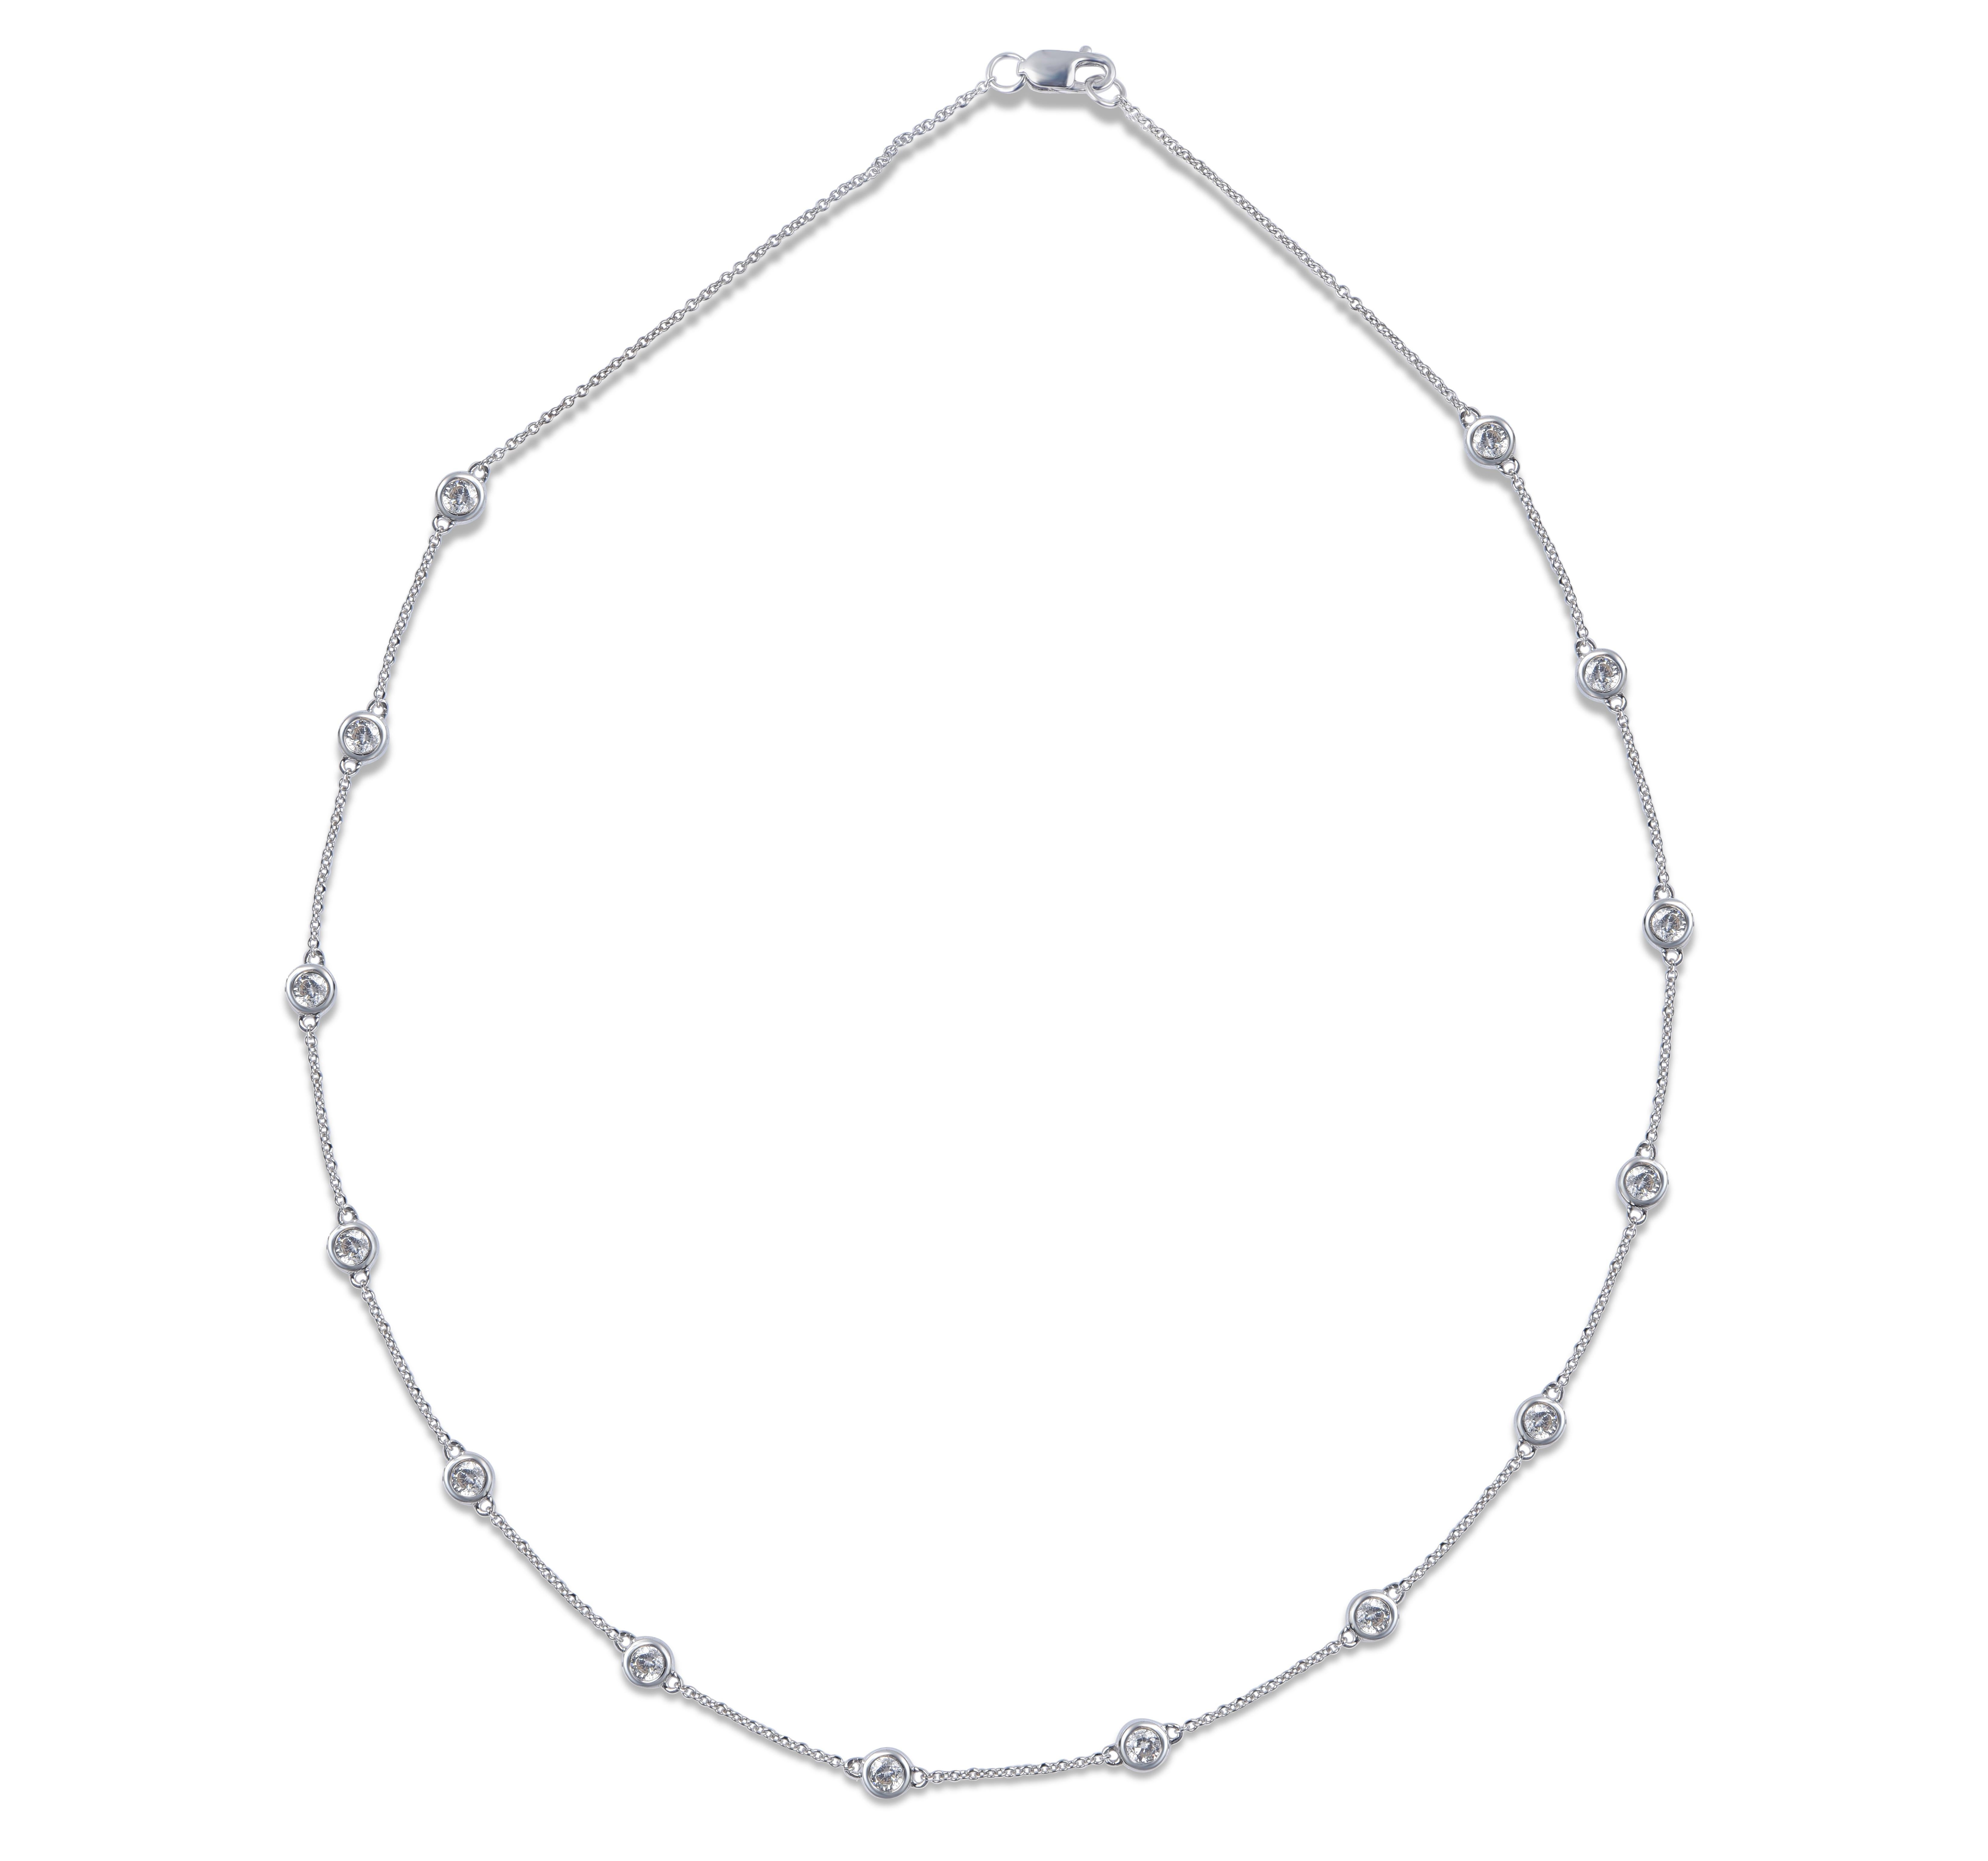 Beautifully hand-crafted by our skillful craftsmen in 14-karat white gold, features 14 brilliant-cut diamonds studded beautifully in pave setting. The diamonds are graded HI Color, I1 Clarity. Comes along with 18-inch cable chain.